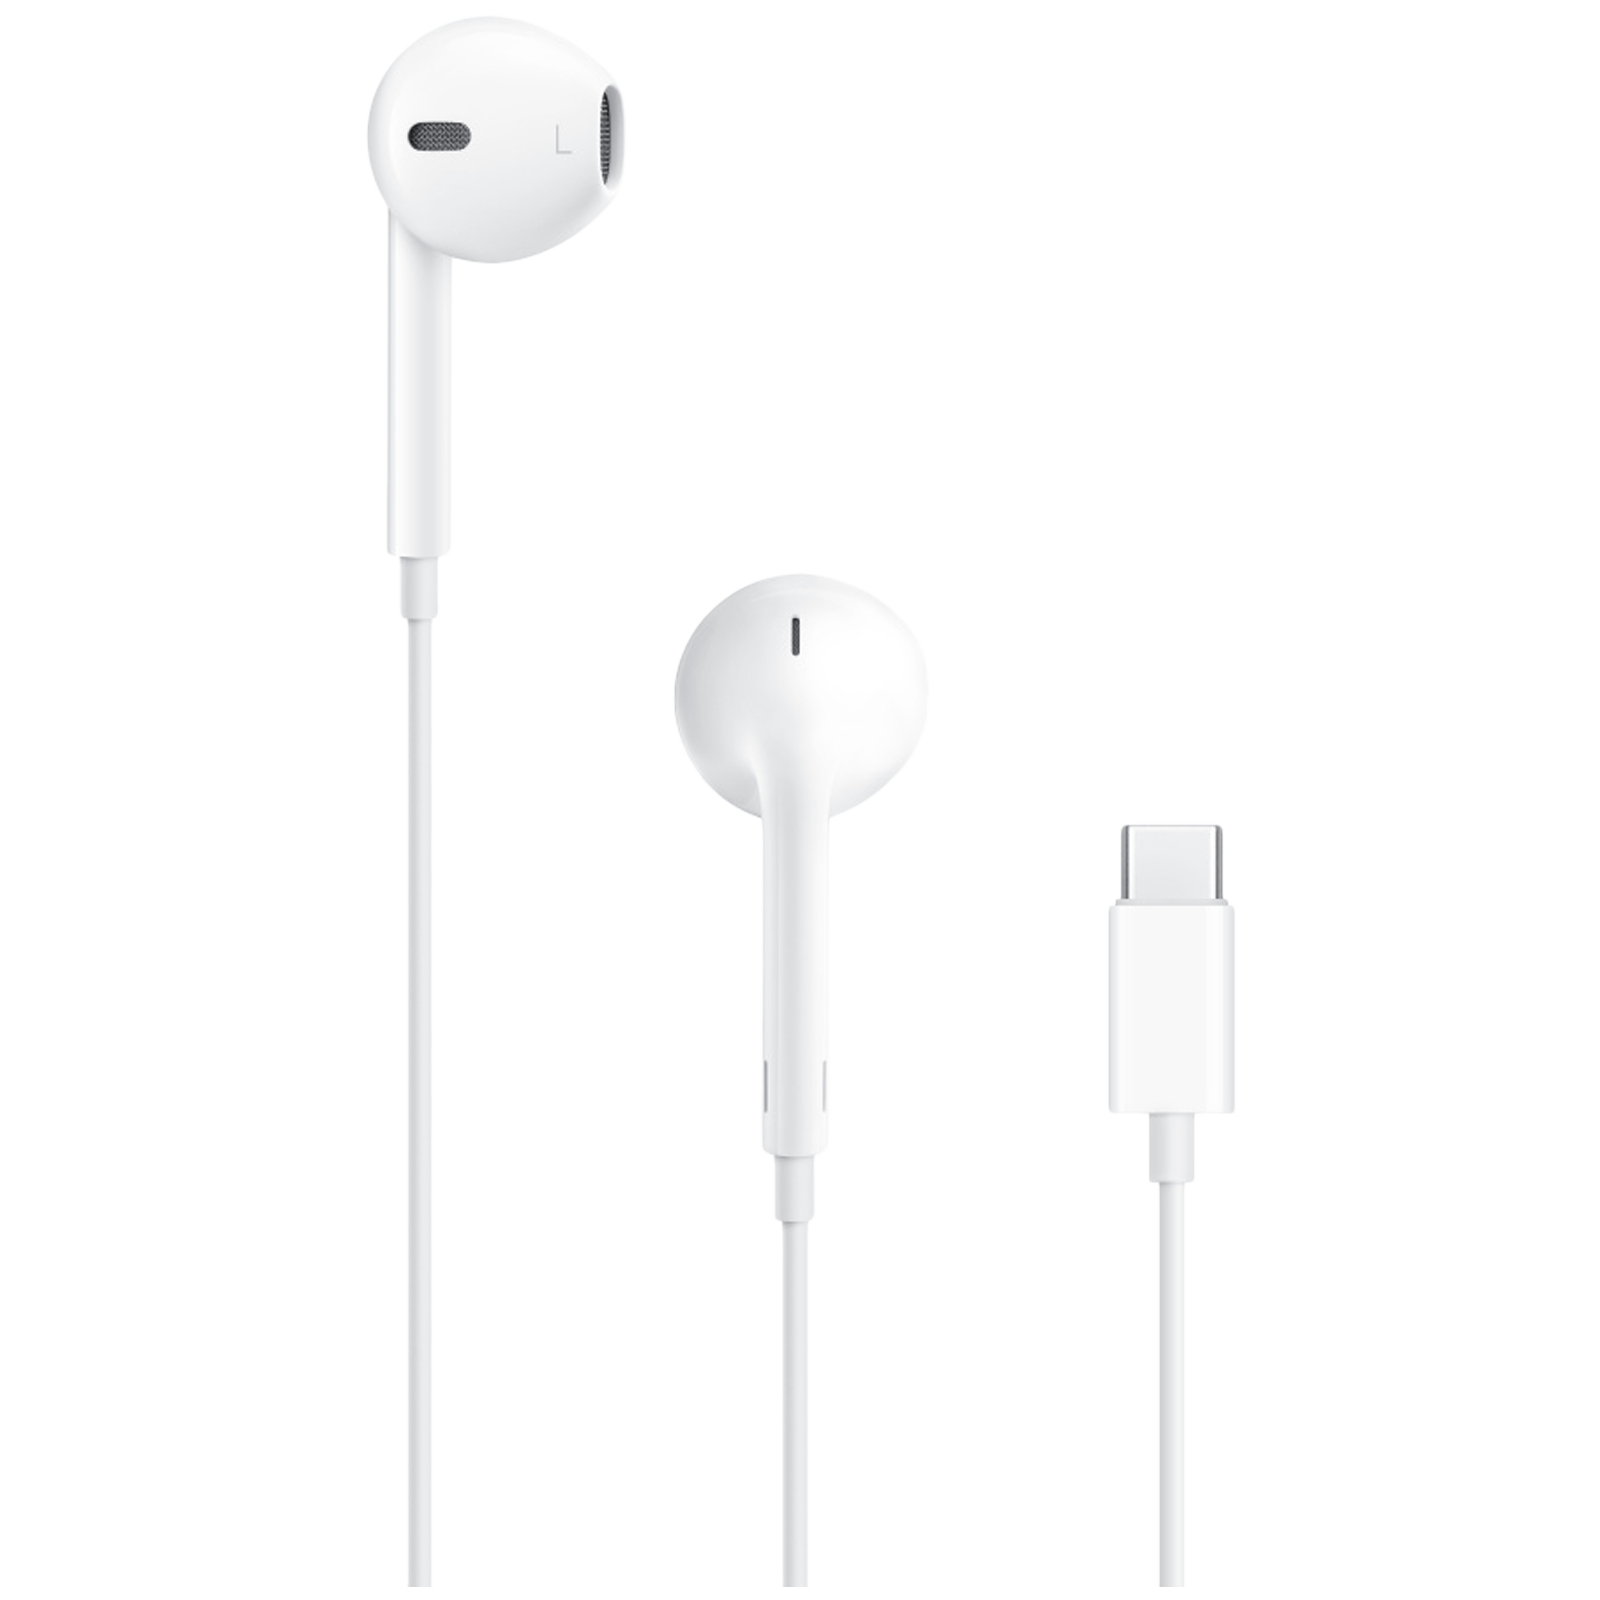 Apple EarPods Wired Earphones with Mic (USB-C Connector, In Ear, White)